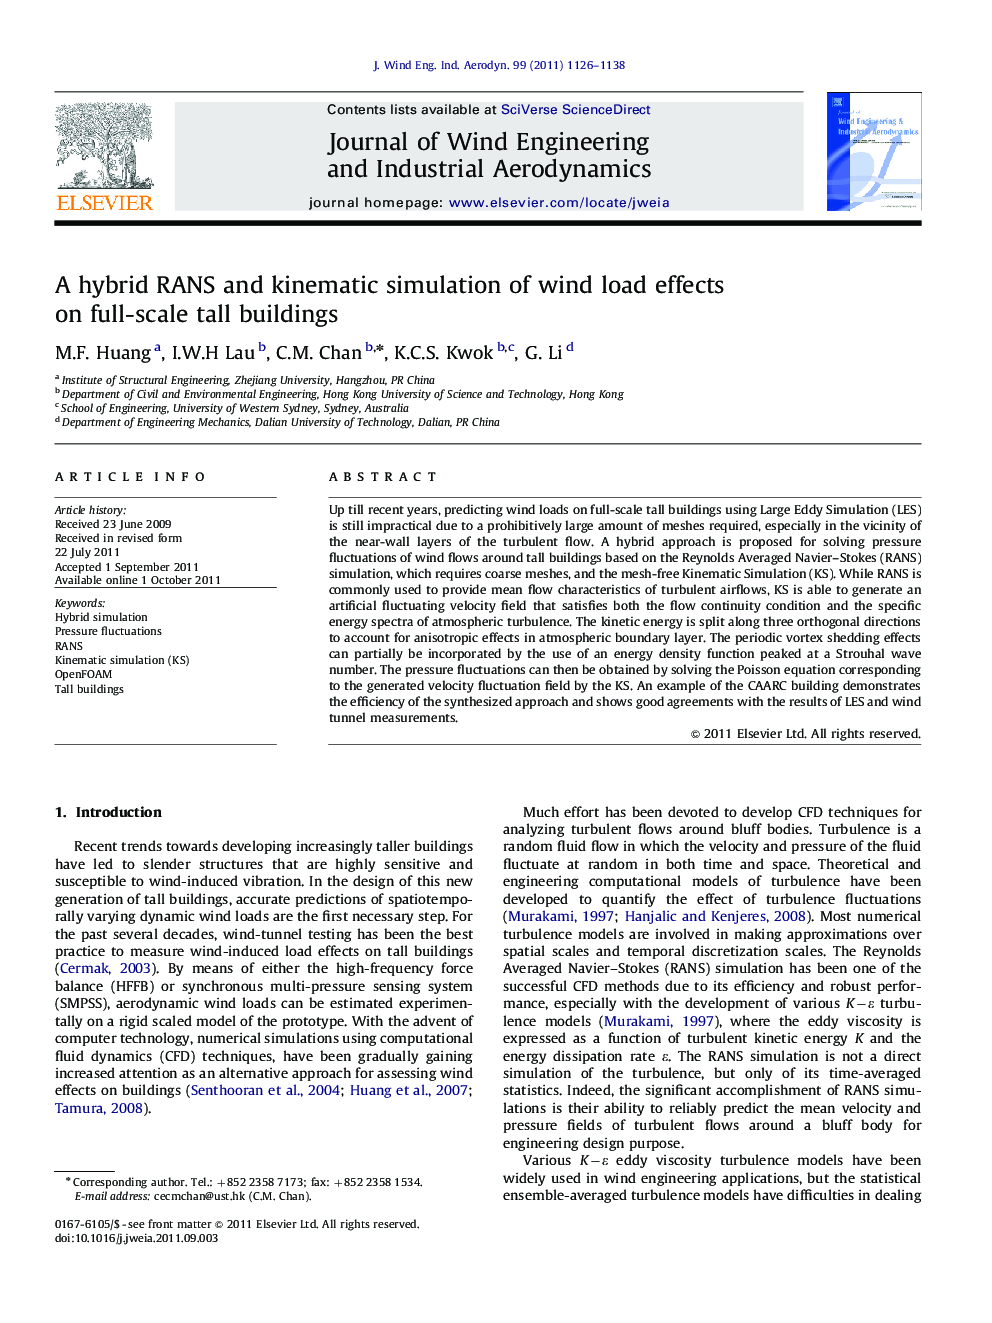 A hybrid RANS and kinematic simulation of wind load effects on full-scale tall buildings